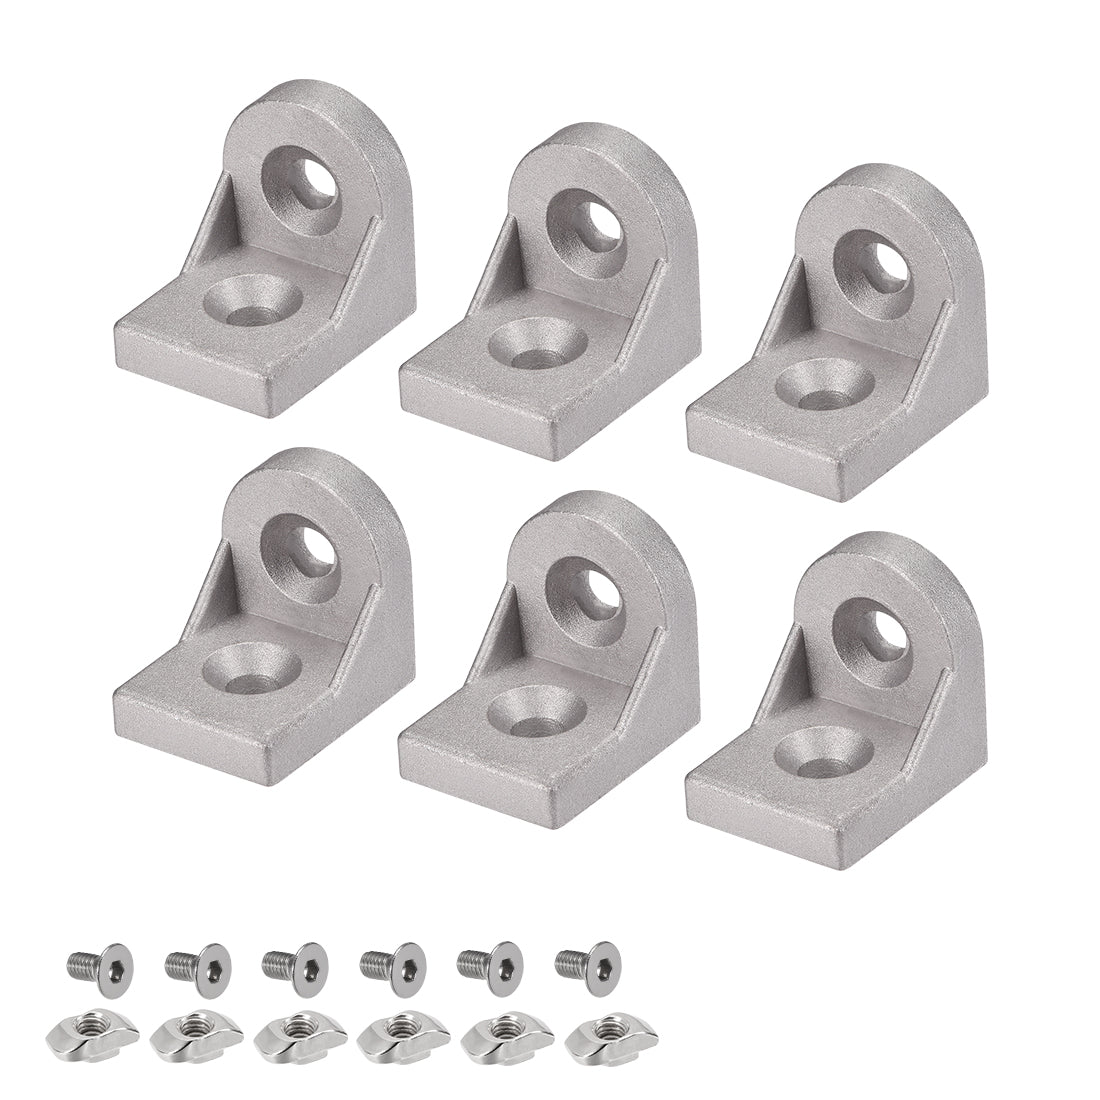 uxcell Uxcell Angle Arbitrary Bracket Set, Corner L Connector for 3030 Series Aluminum Extrusion Profile with Slot 8mm, 6 Pcs